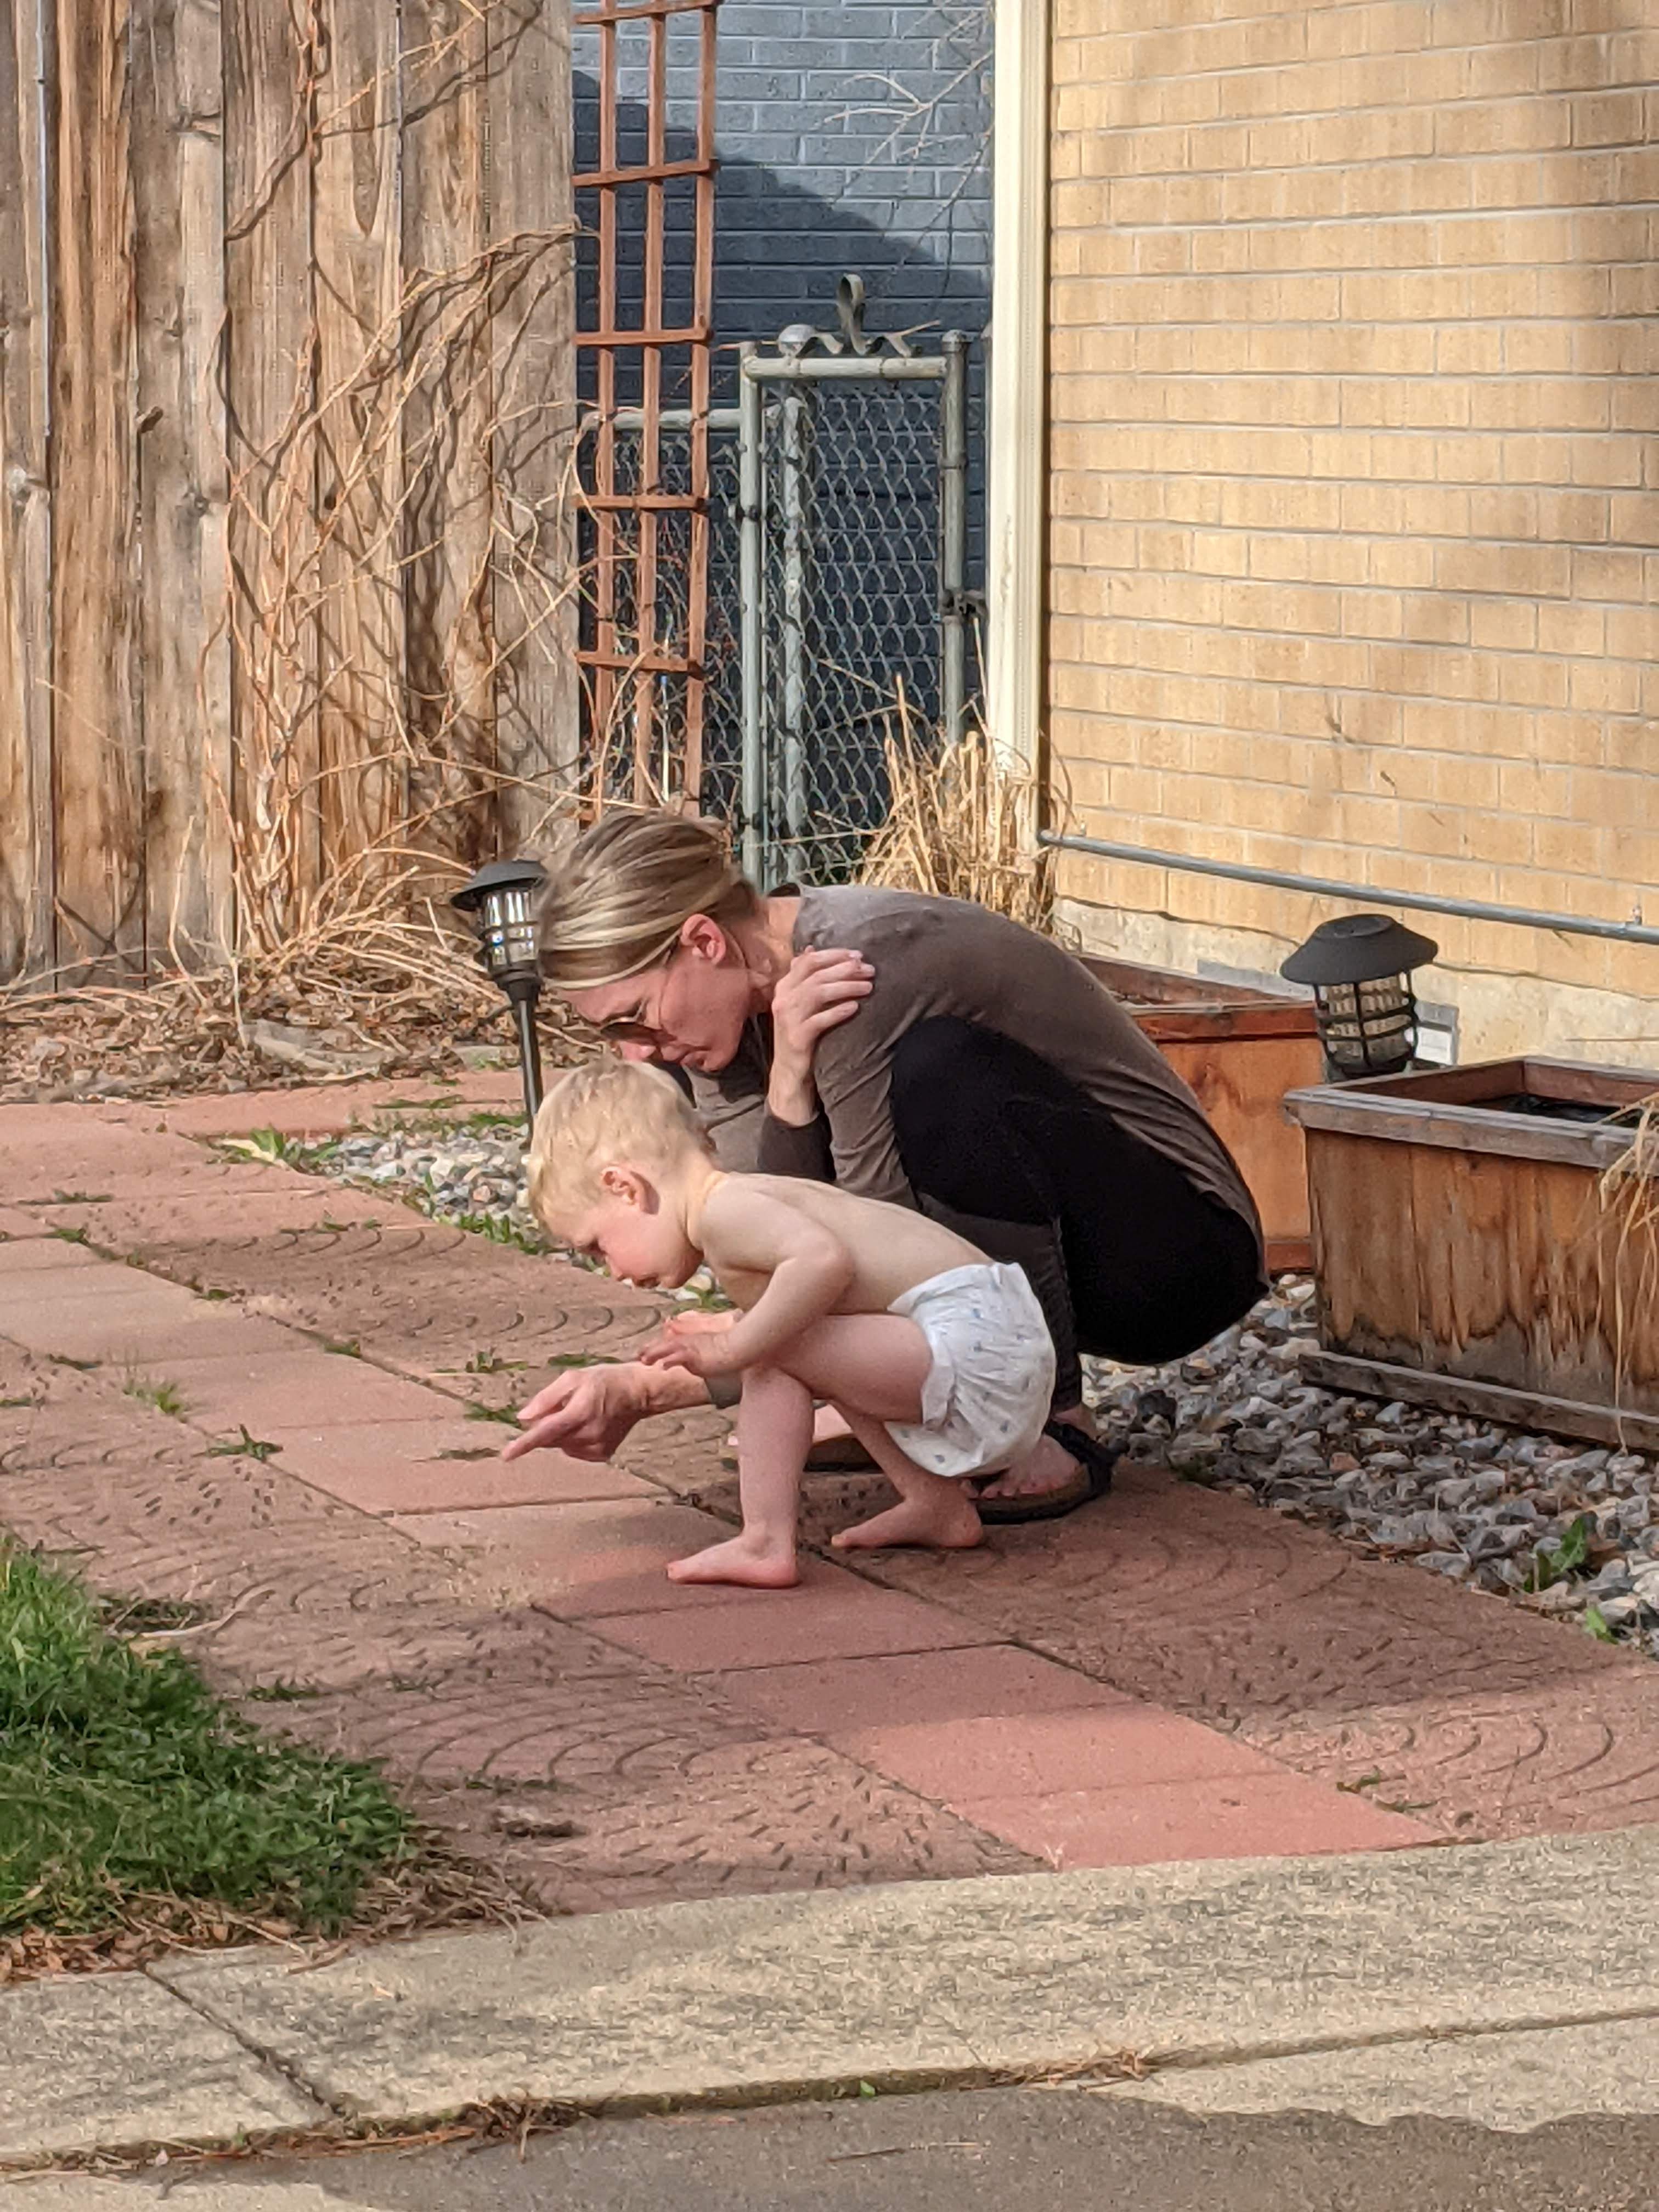 Owen and his mom studying ants